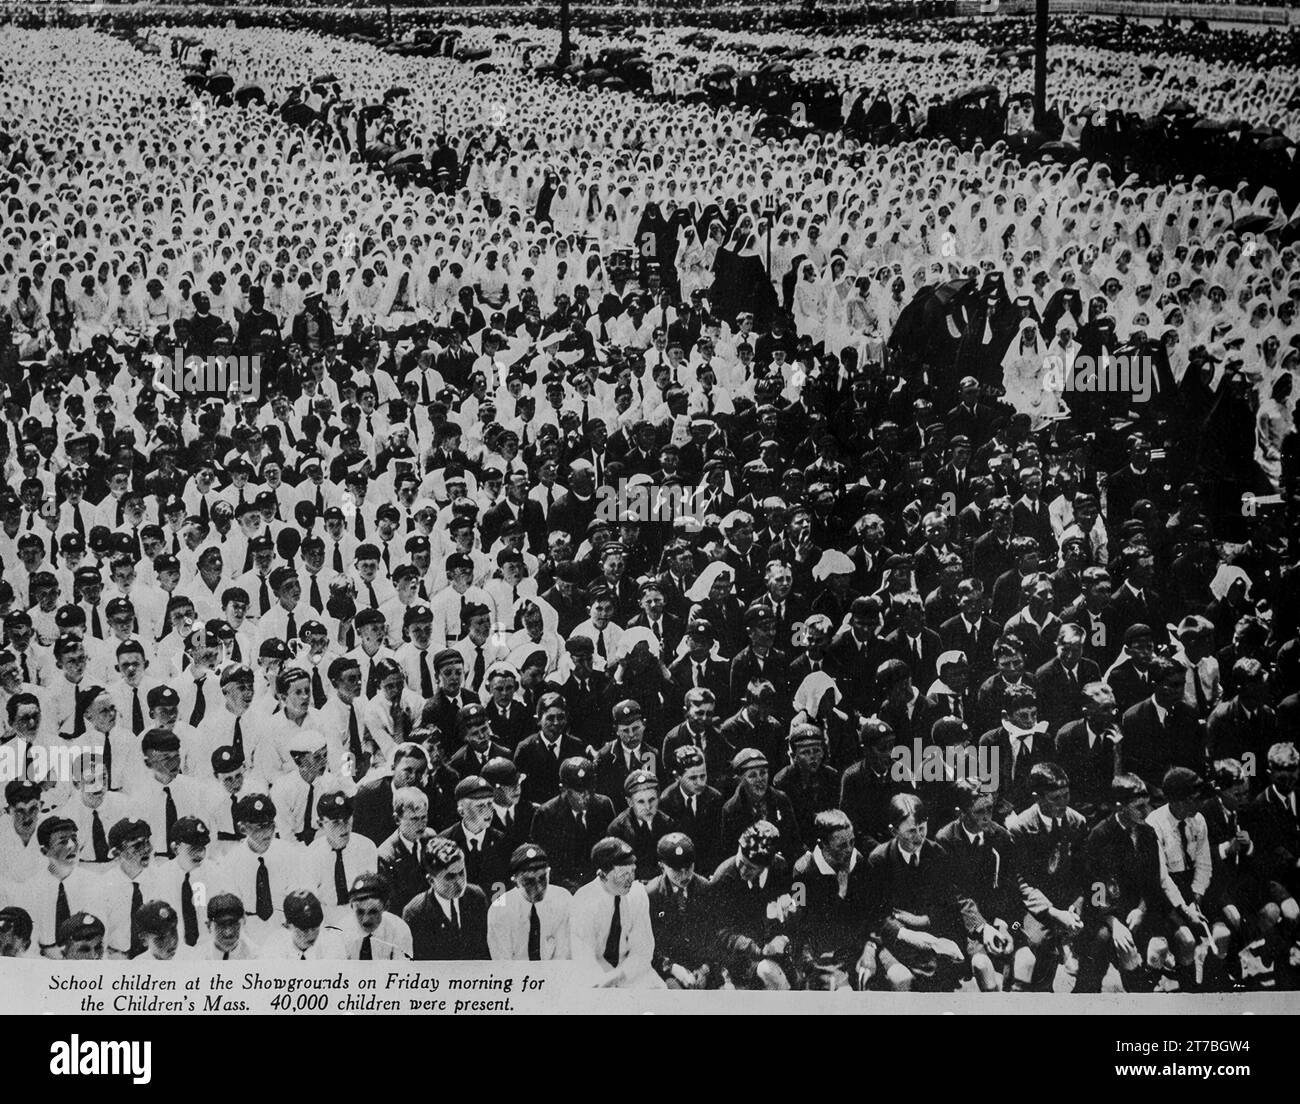 An image from the 1934 Eucharistic Congress in Melbourne, Australia. The image shows a section of the estimated 40,000 children who attended the Children’s Mass Stock Photo